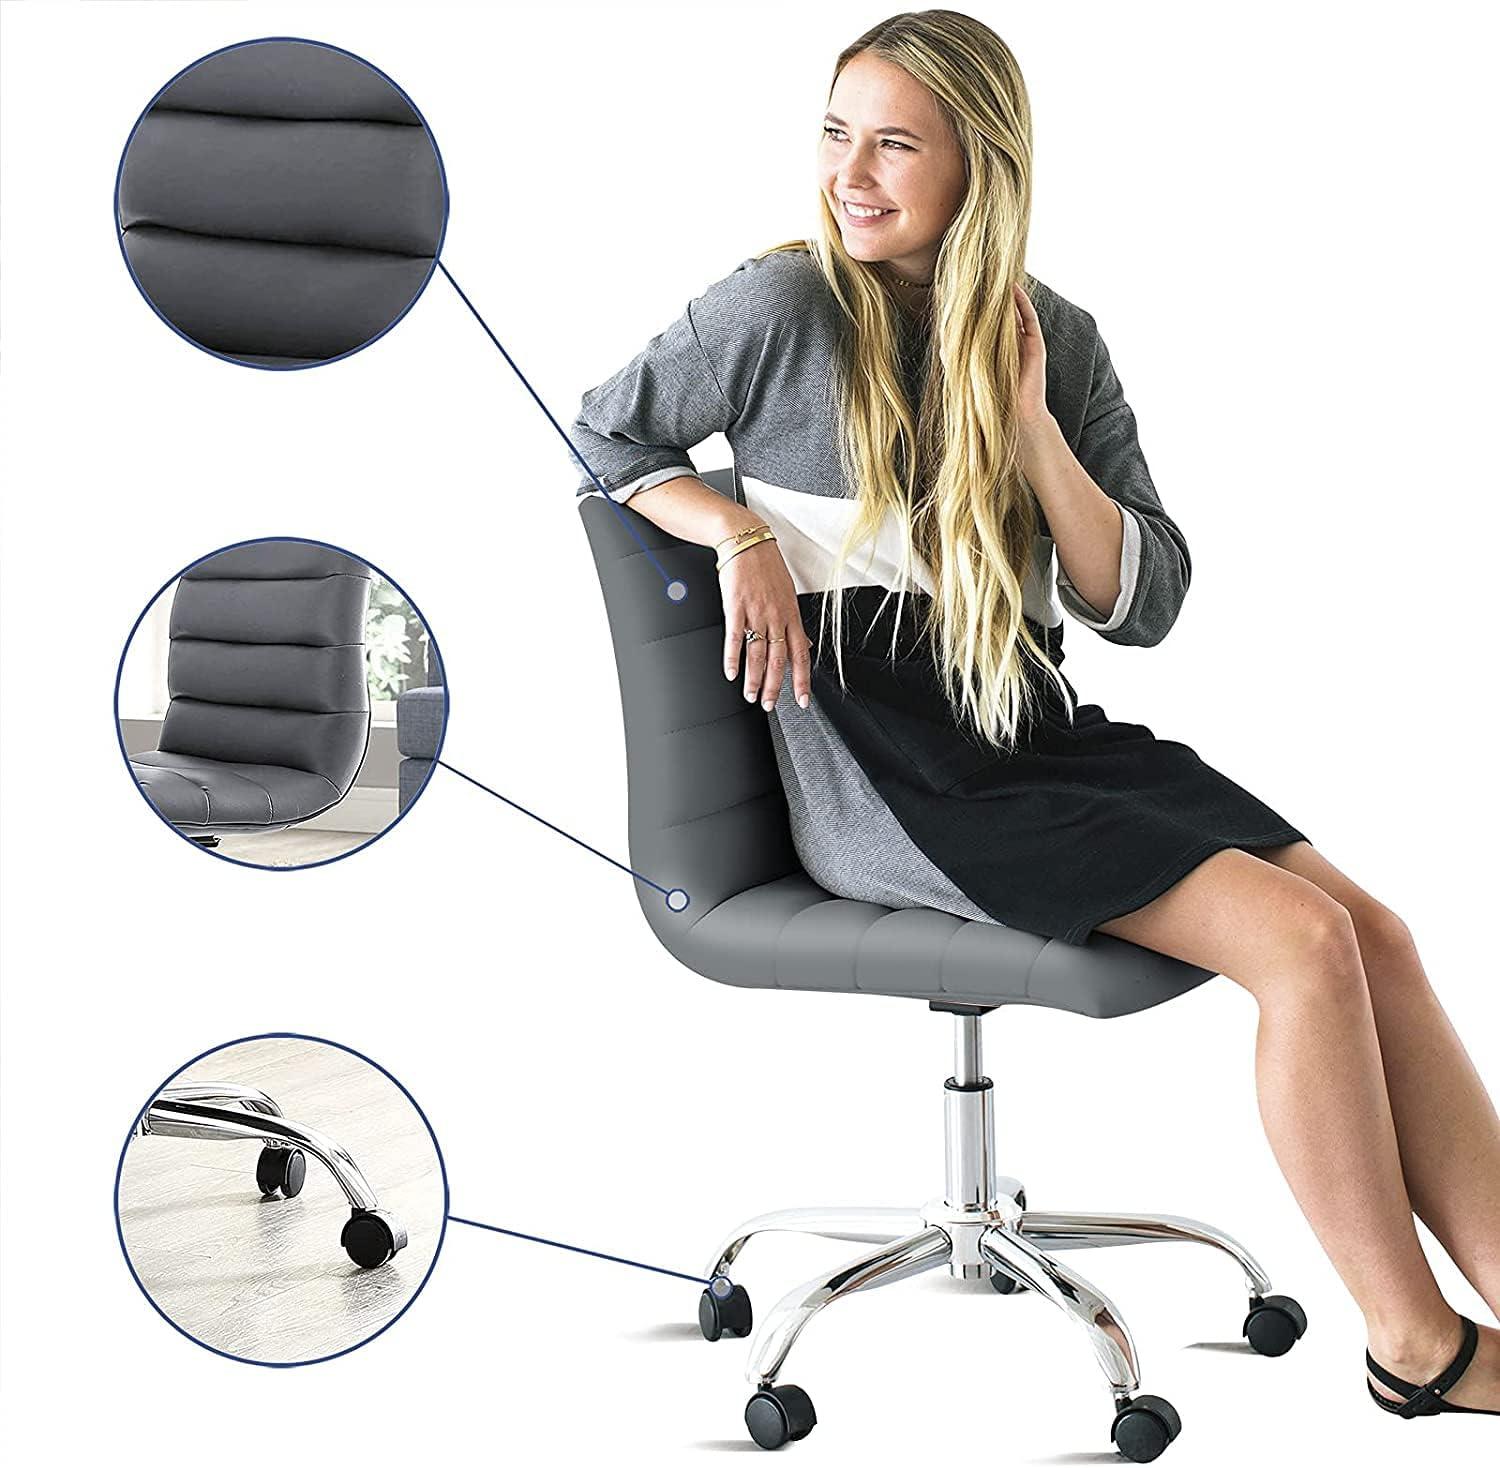 Ripple Mid-Back Swivel Task Chair in Gray Faux Leather